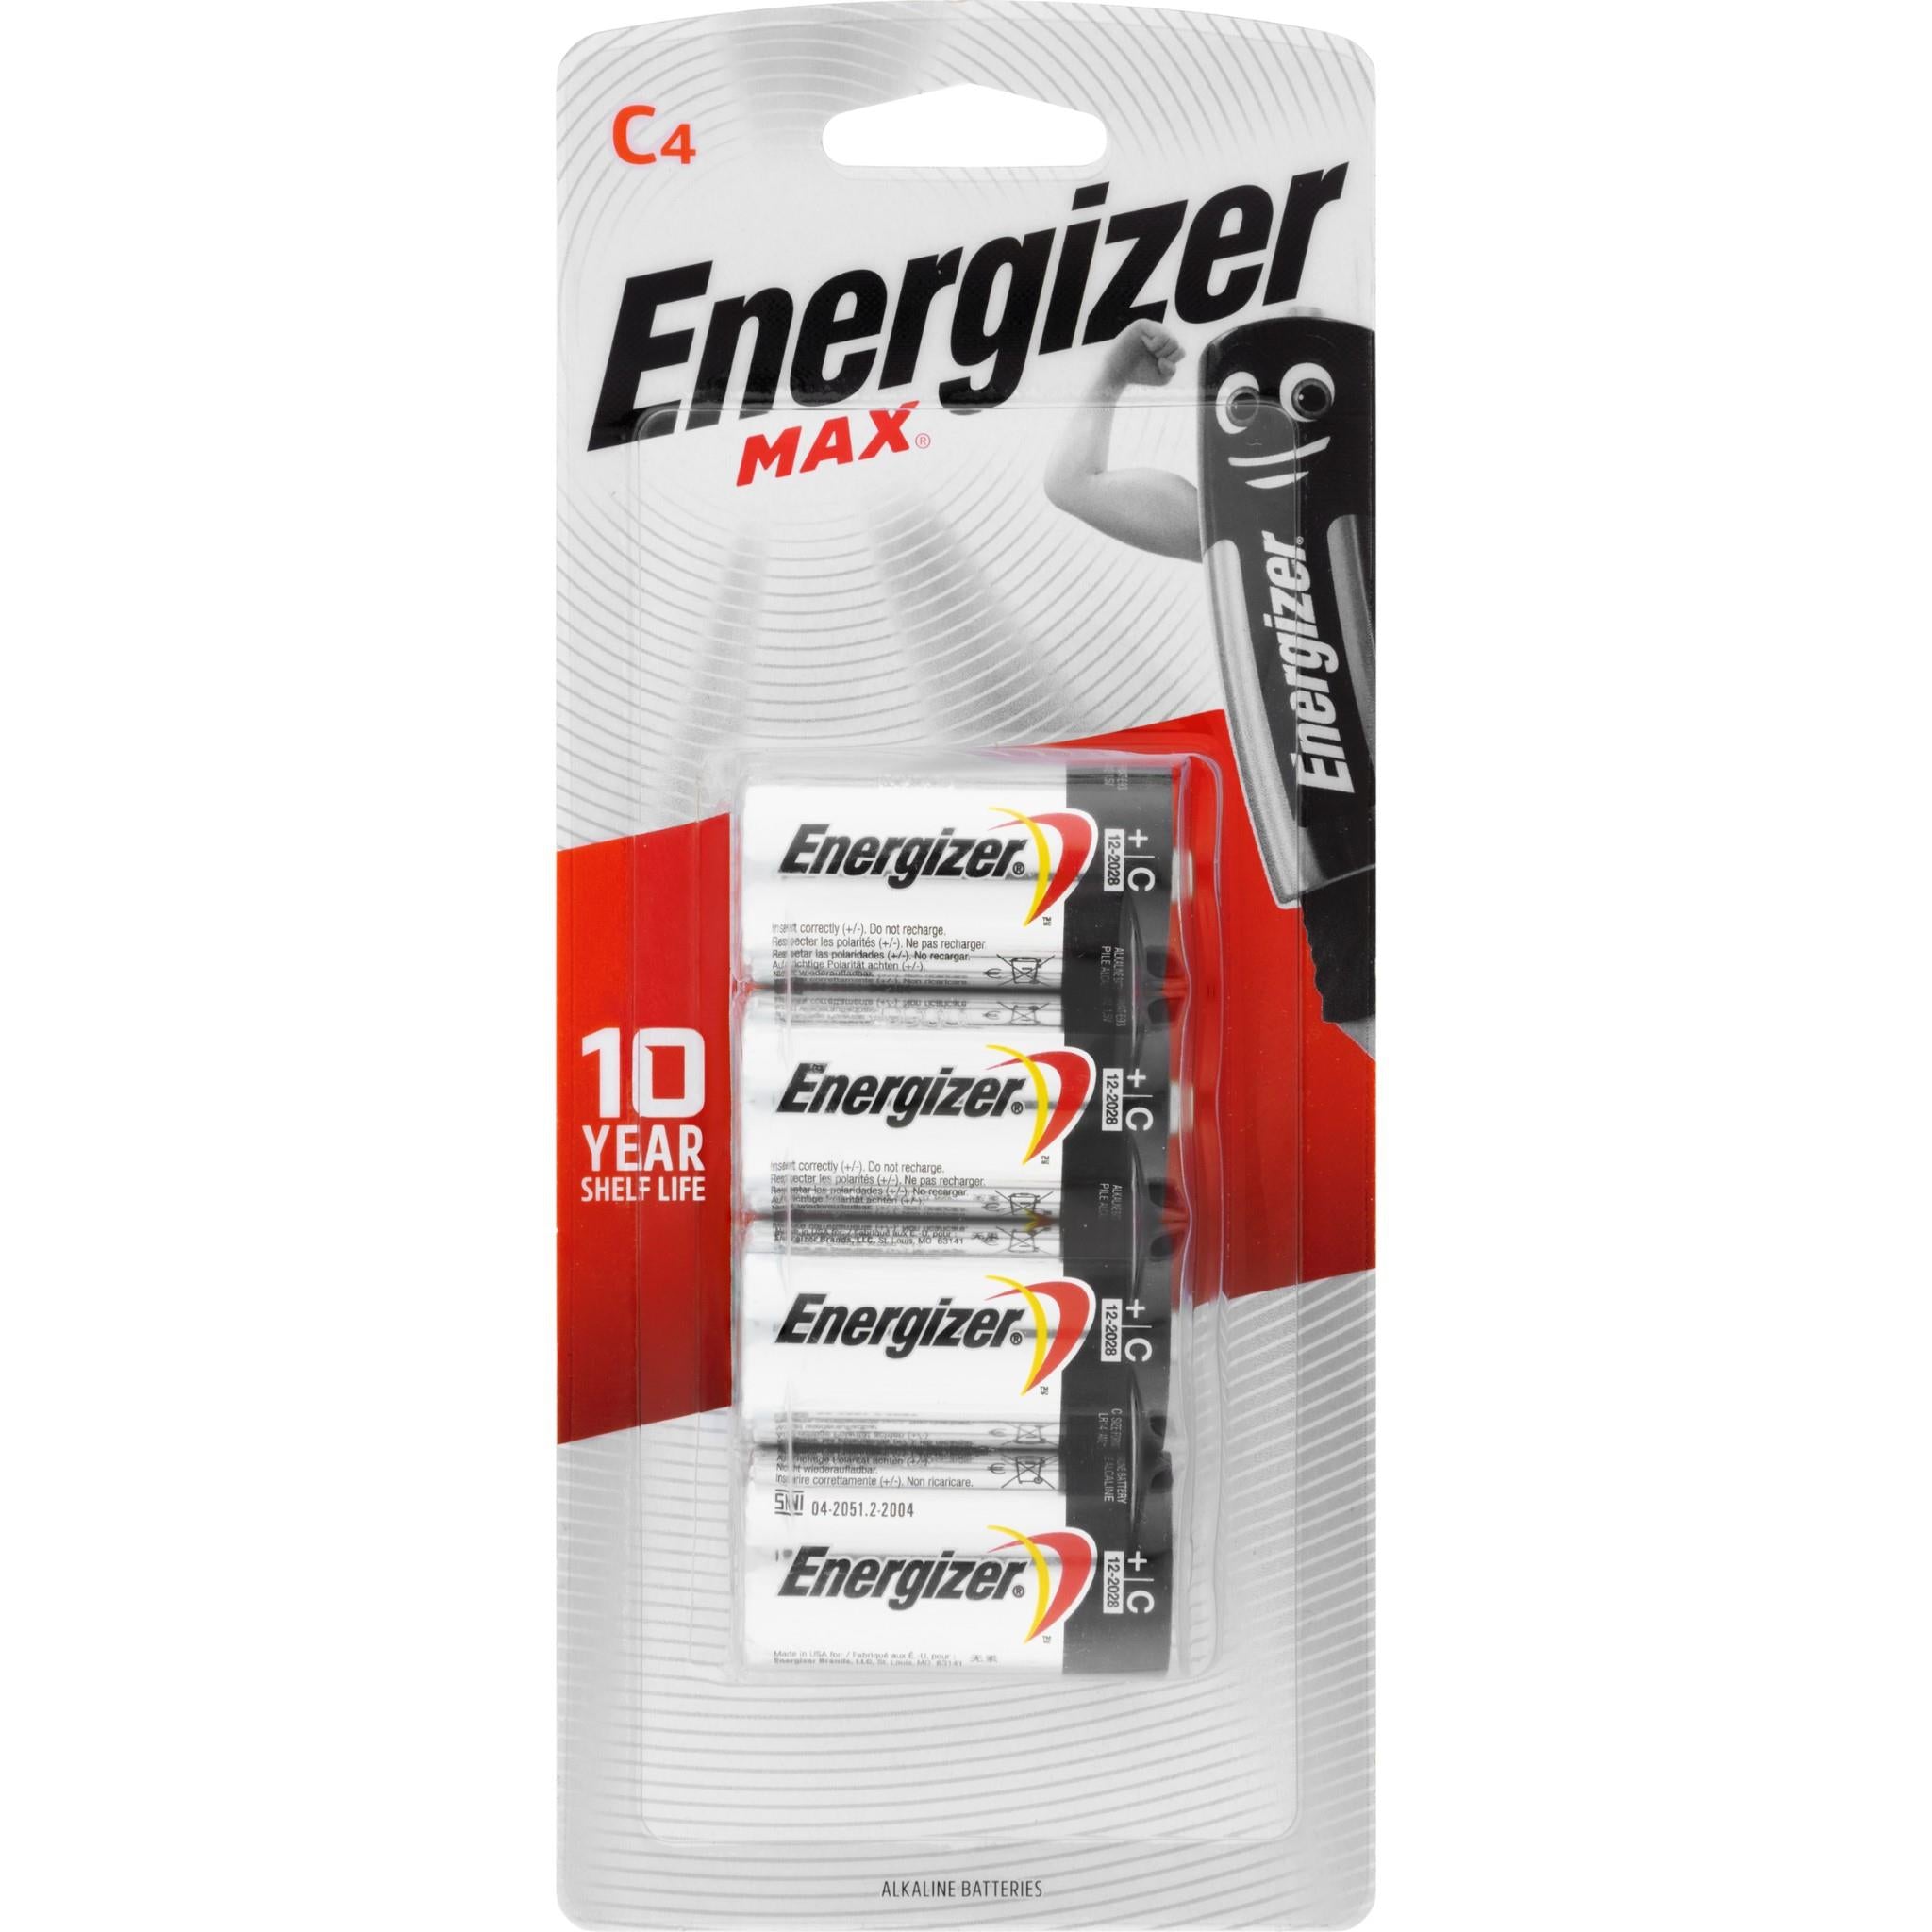 energizer max c battery (4-pack)